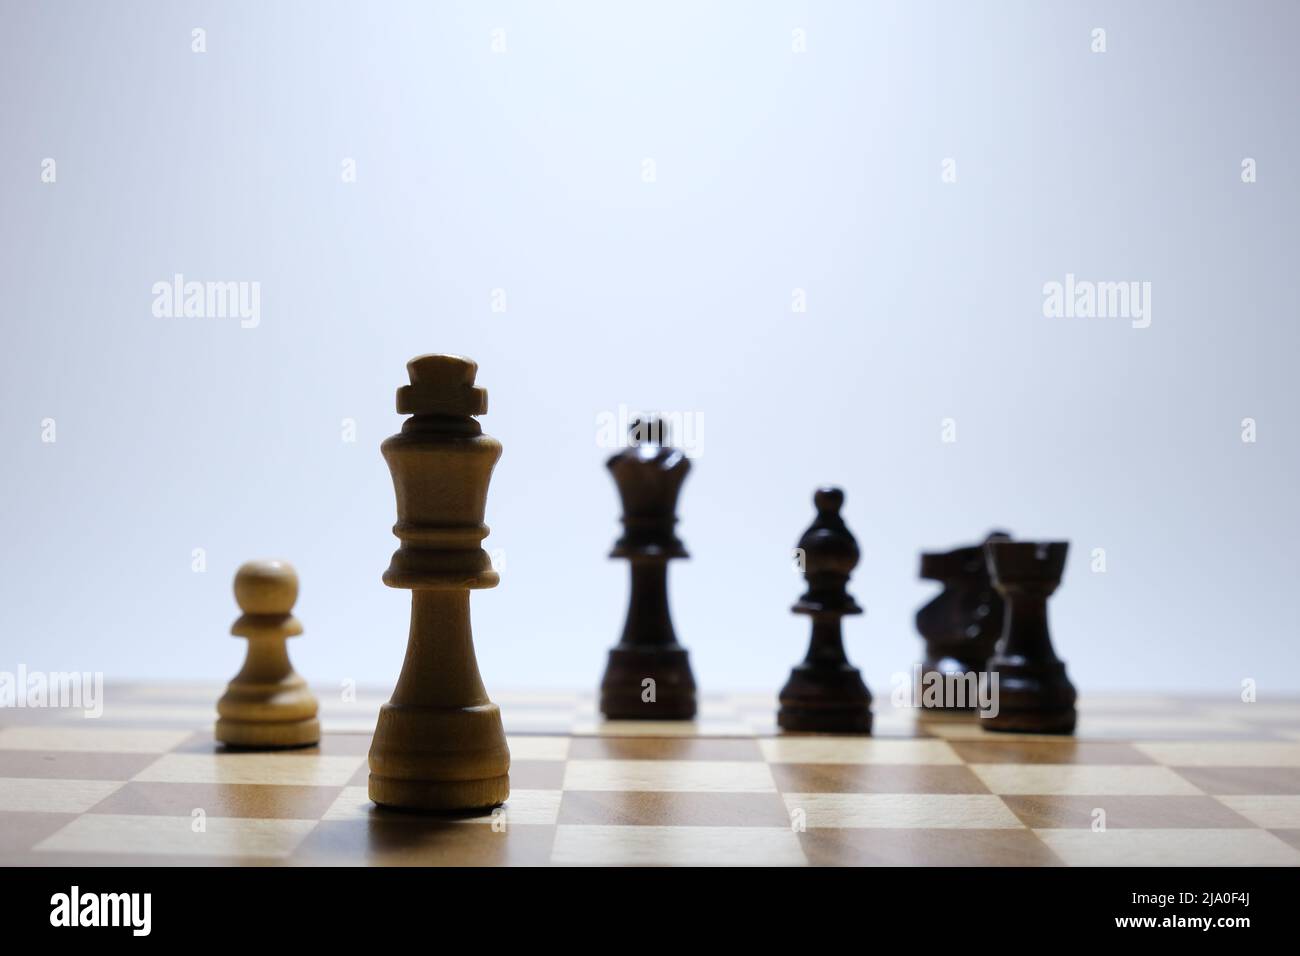 Checkmate concept. Chess board game concept background. Wood chess pieces on board game. Stock Photo